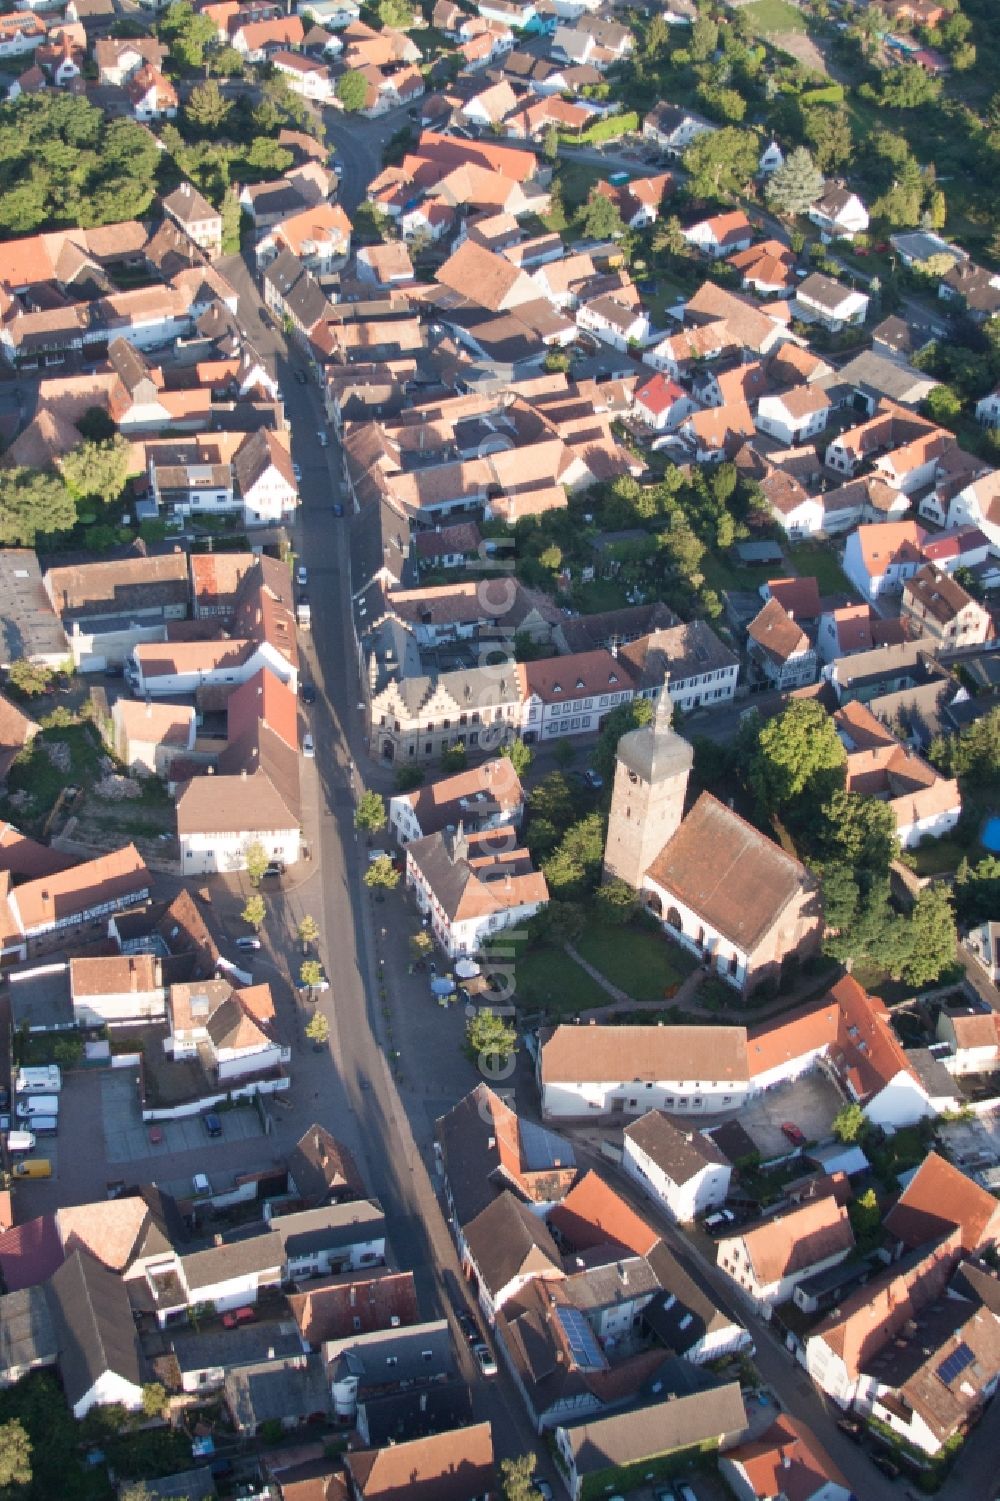 Aerial image Billigheim-Ingenheim - Town View of the streets and houses of the residential areas in the district Billigheim in Billigheim-Ingenheim in the state Rhineland-Palatinate